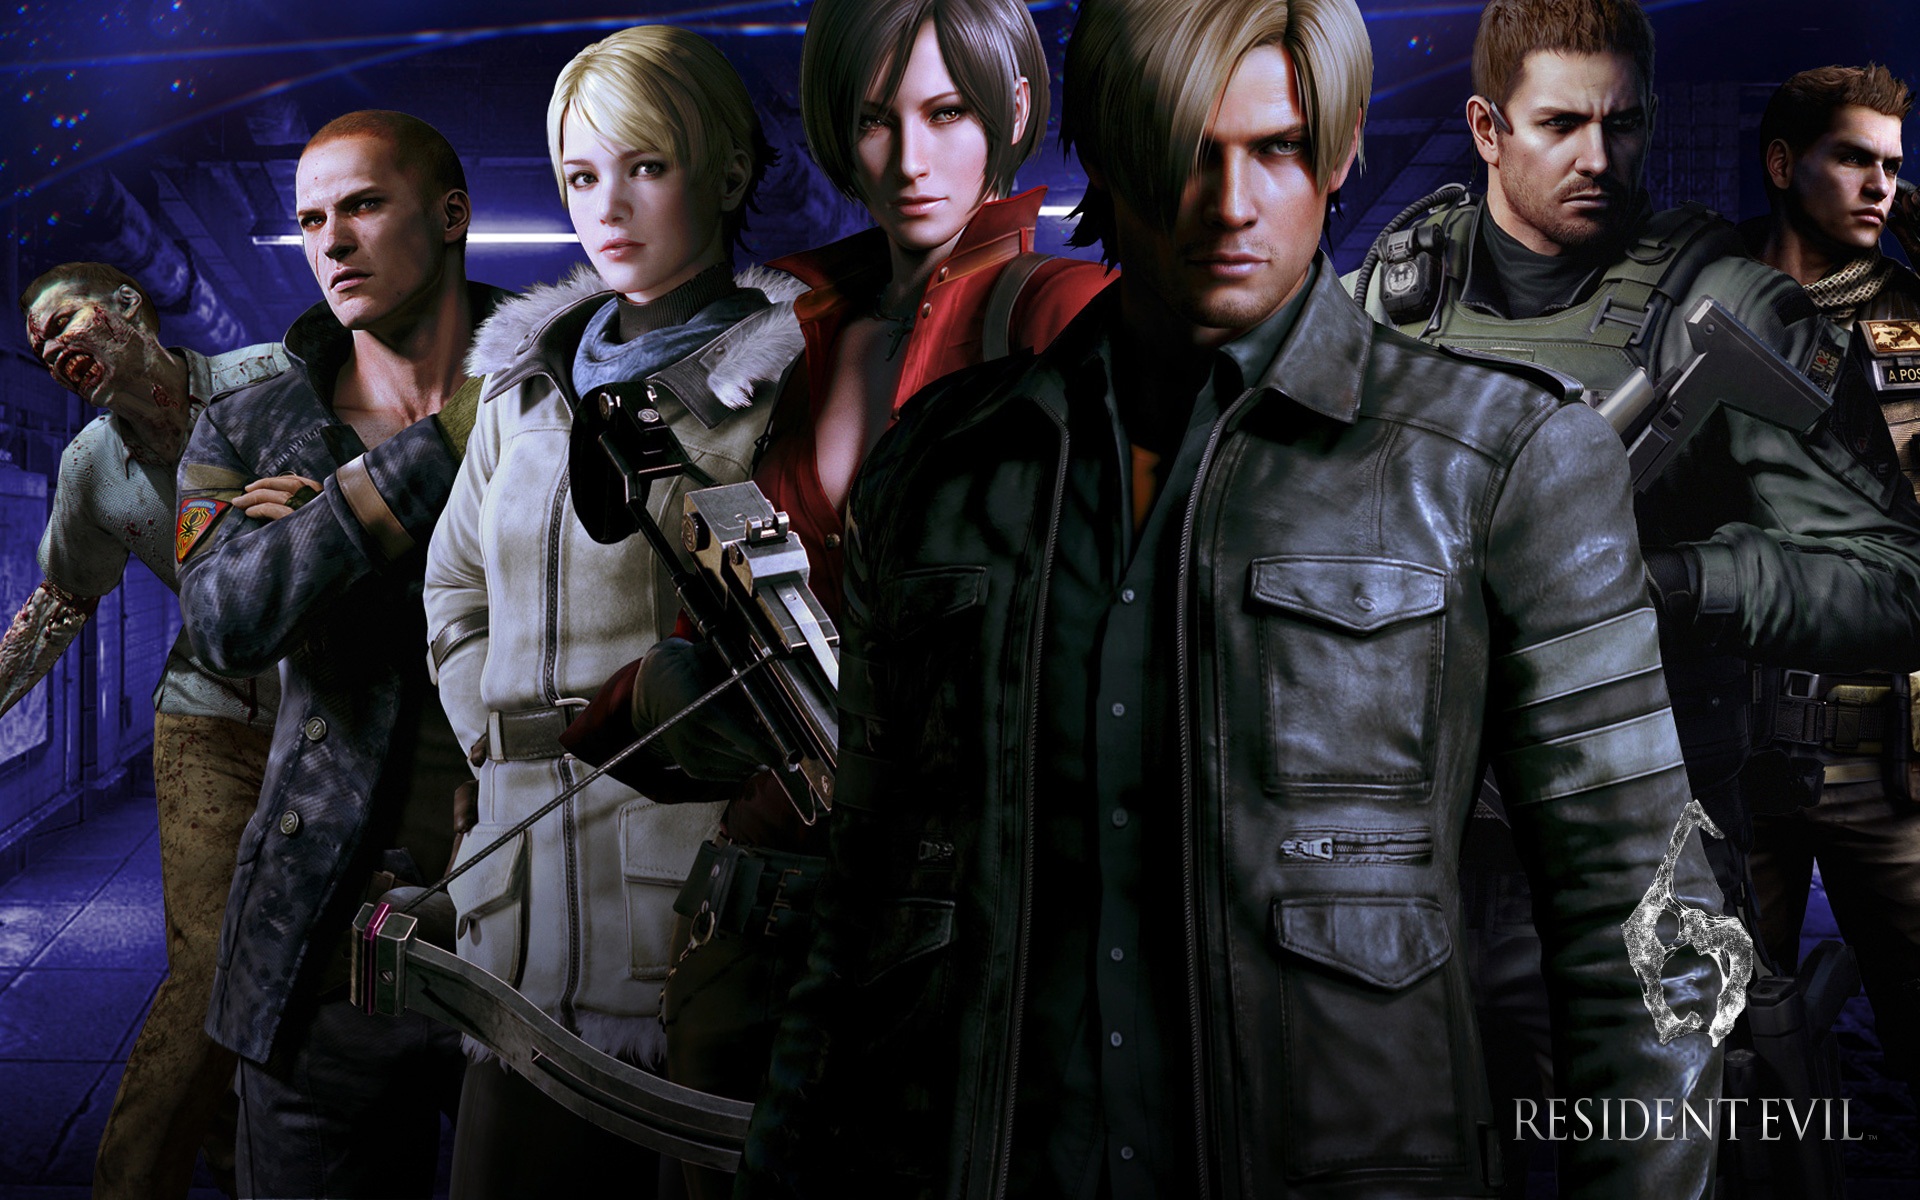 Resident Evil 6 HD game wallpapers #10 - 1920x1200